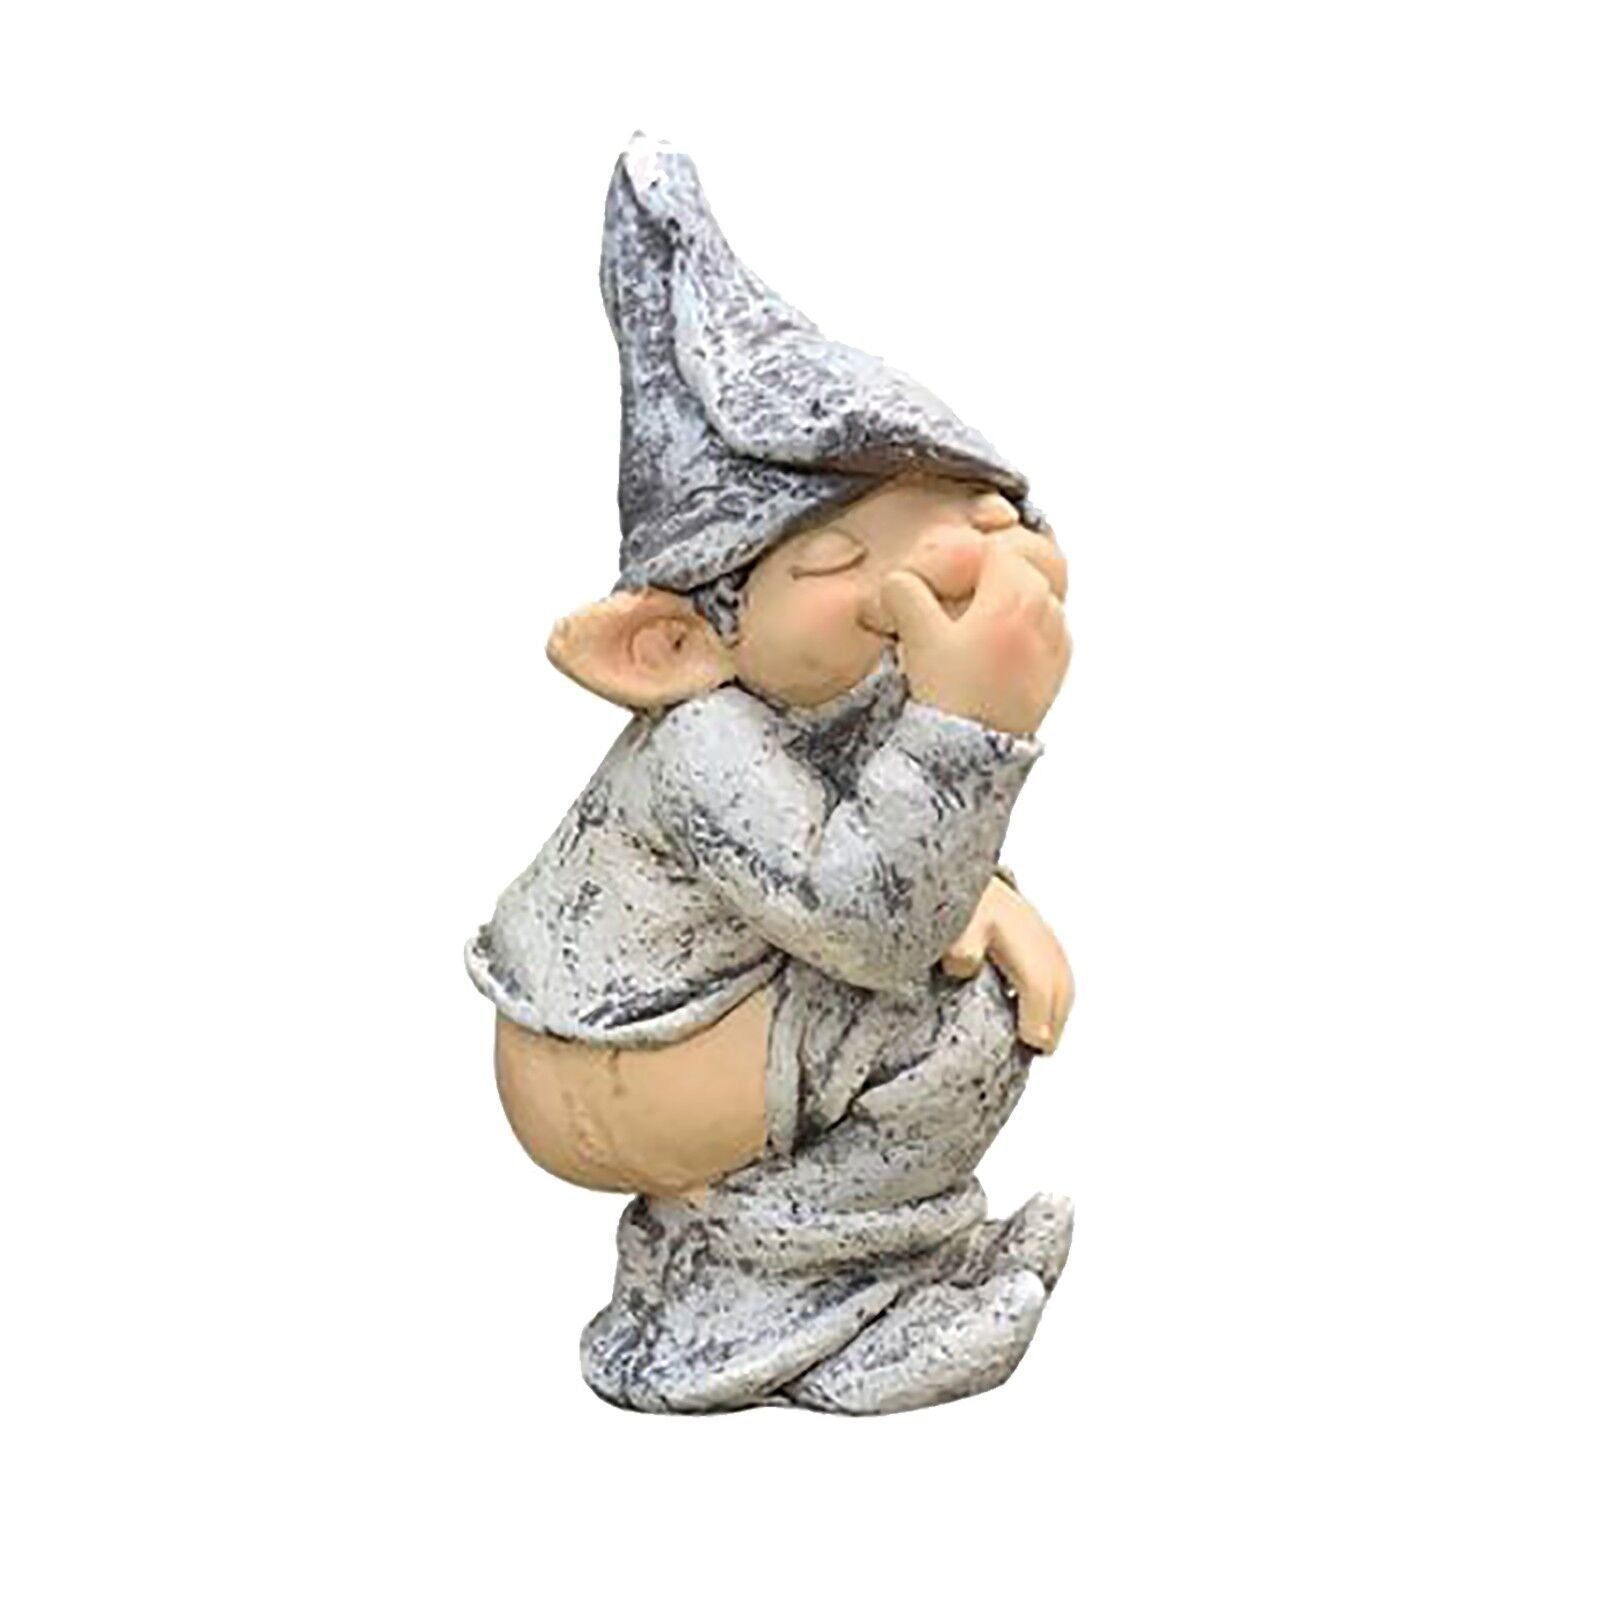 Funny Gnome Miniature Dwarf Pooping Figurine Gnome Statue for your Garden.